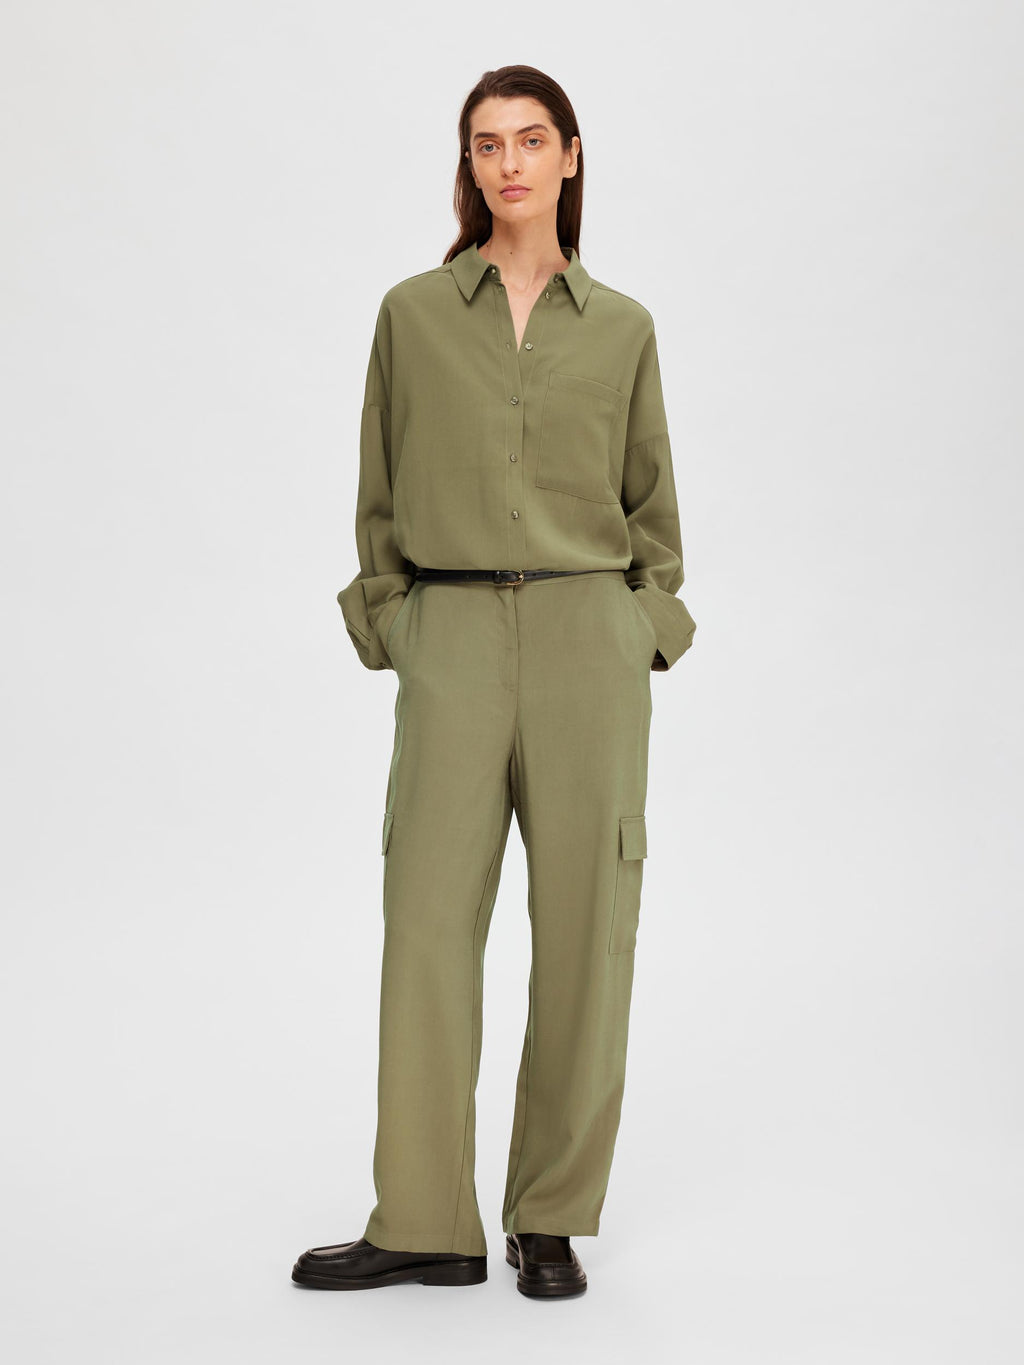 Selected Femme Emberly Trousers